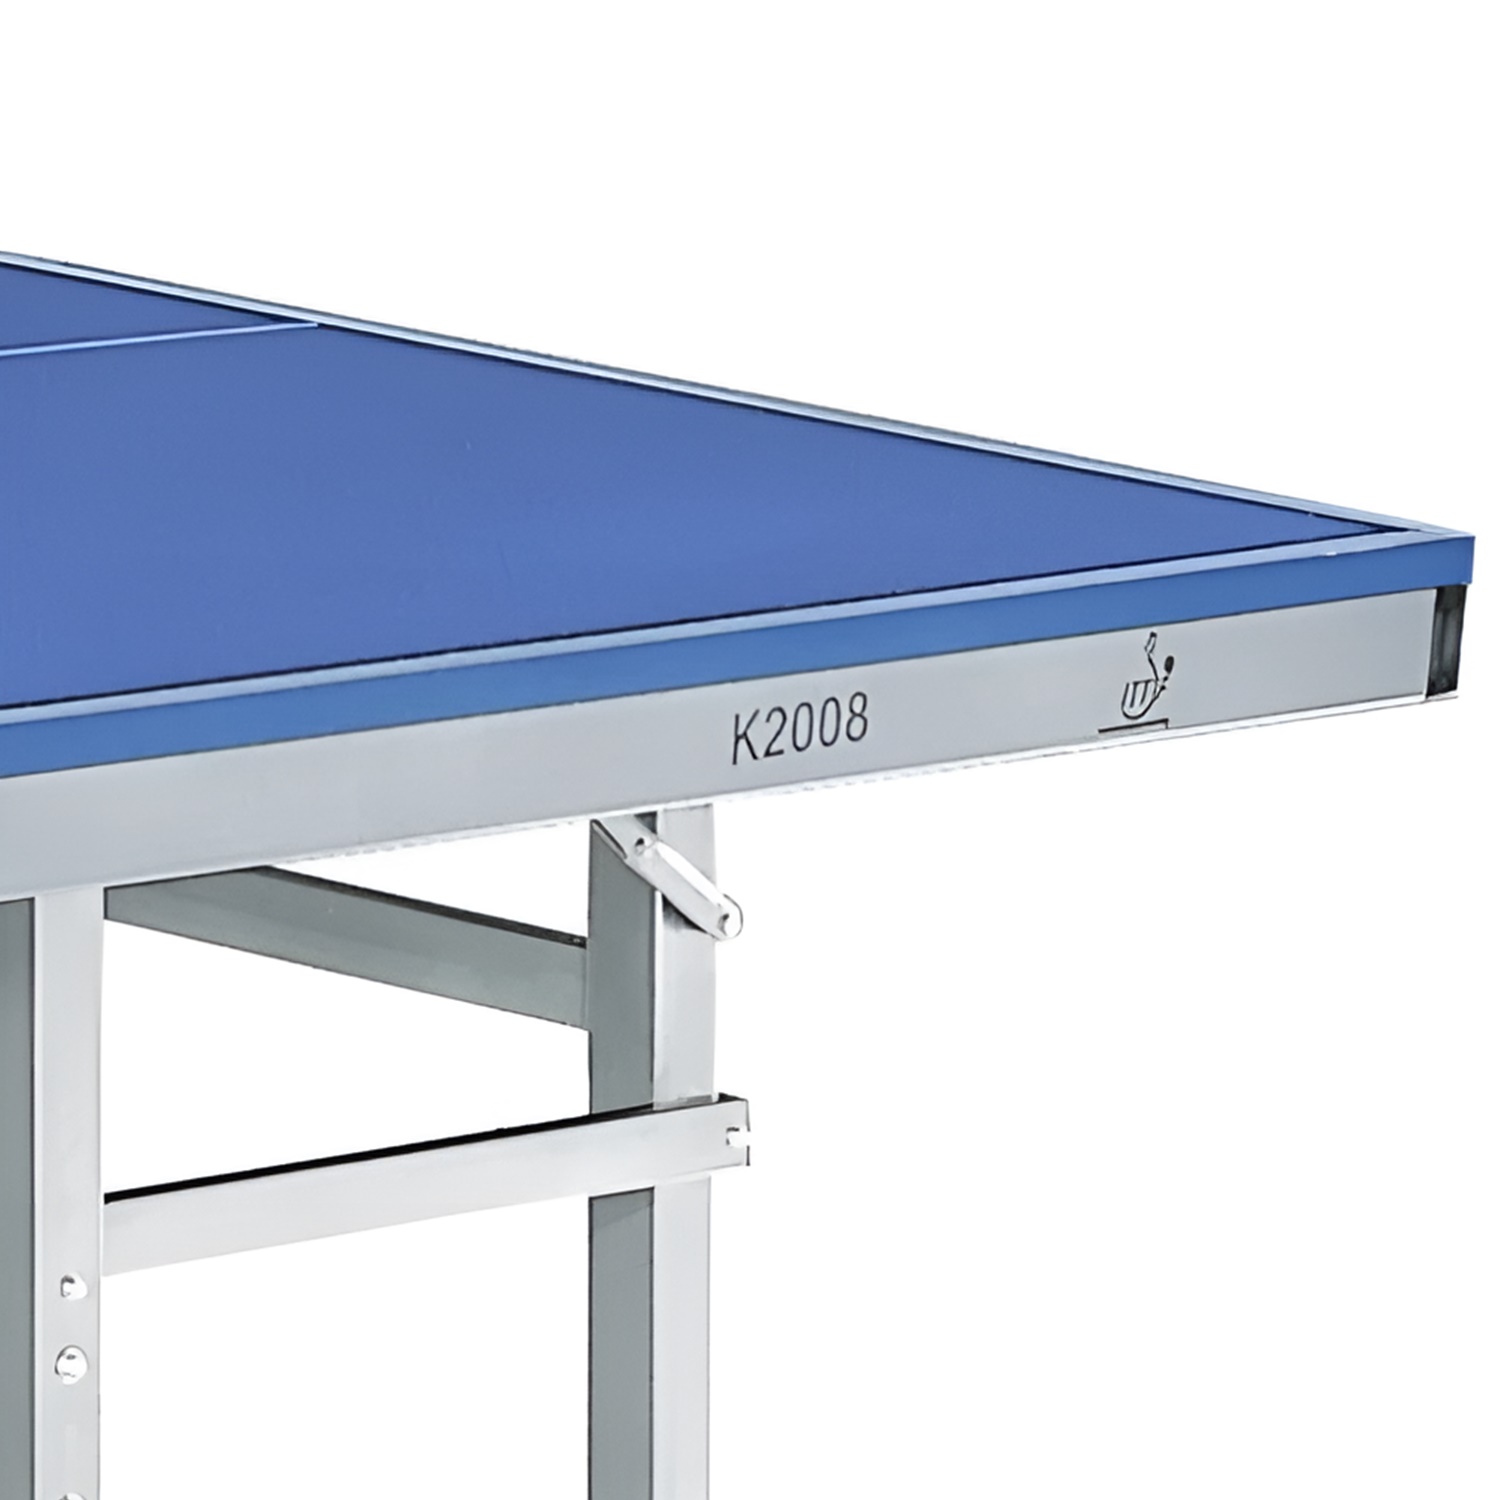 ITTF Approved Table Tennis Table